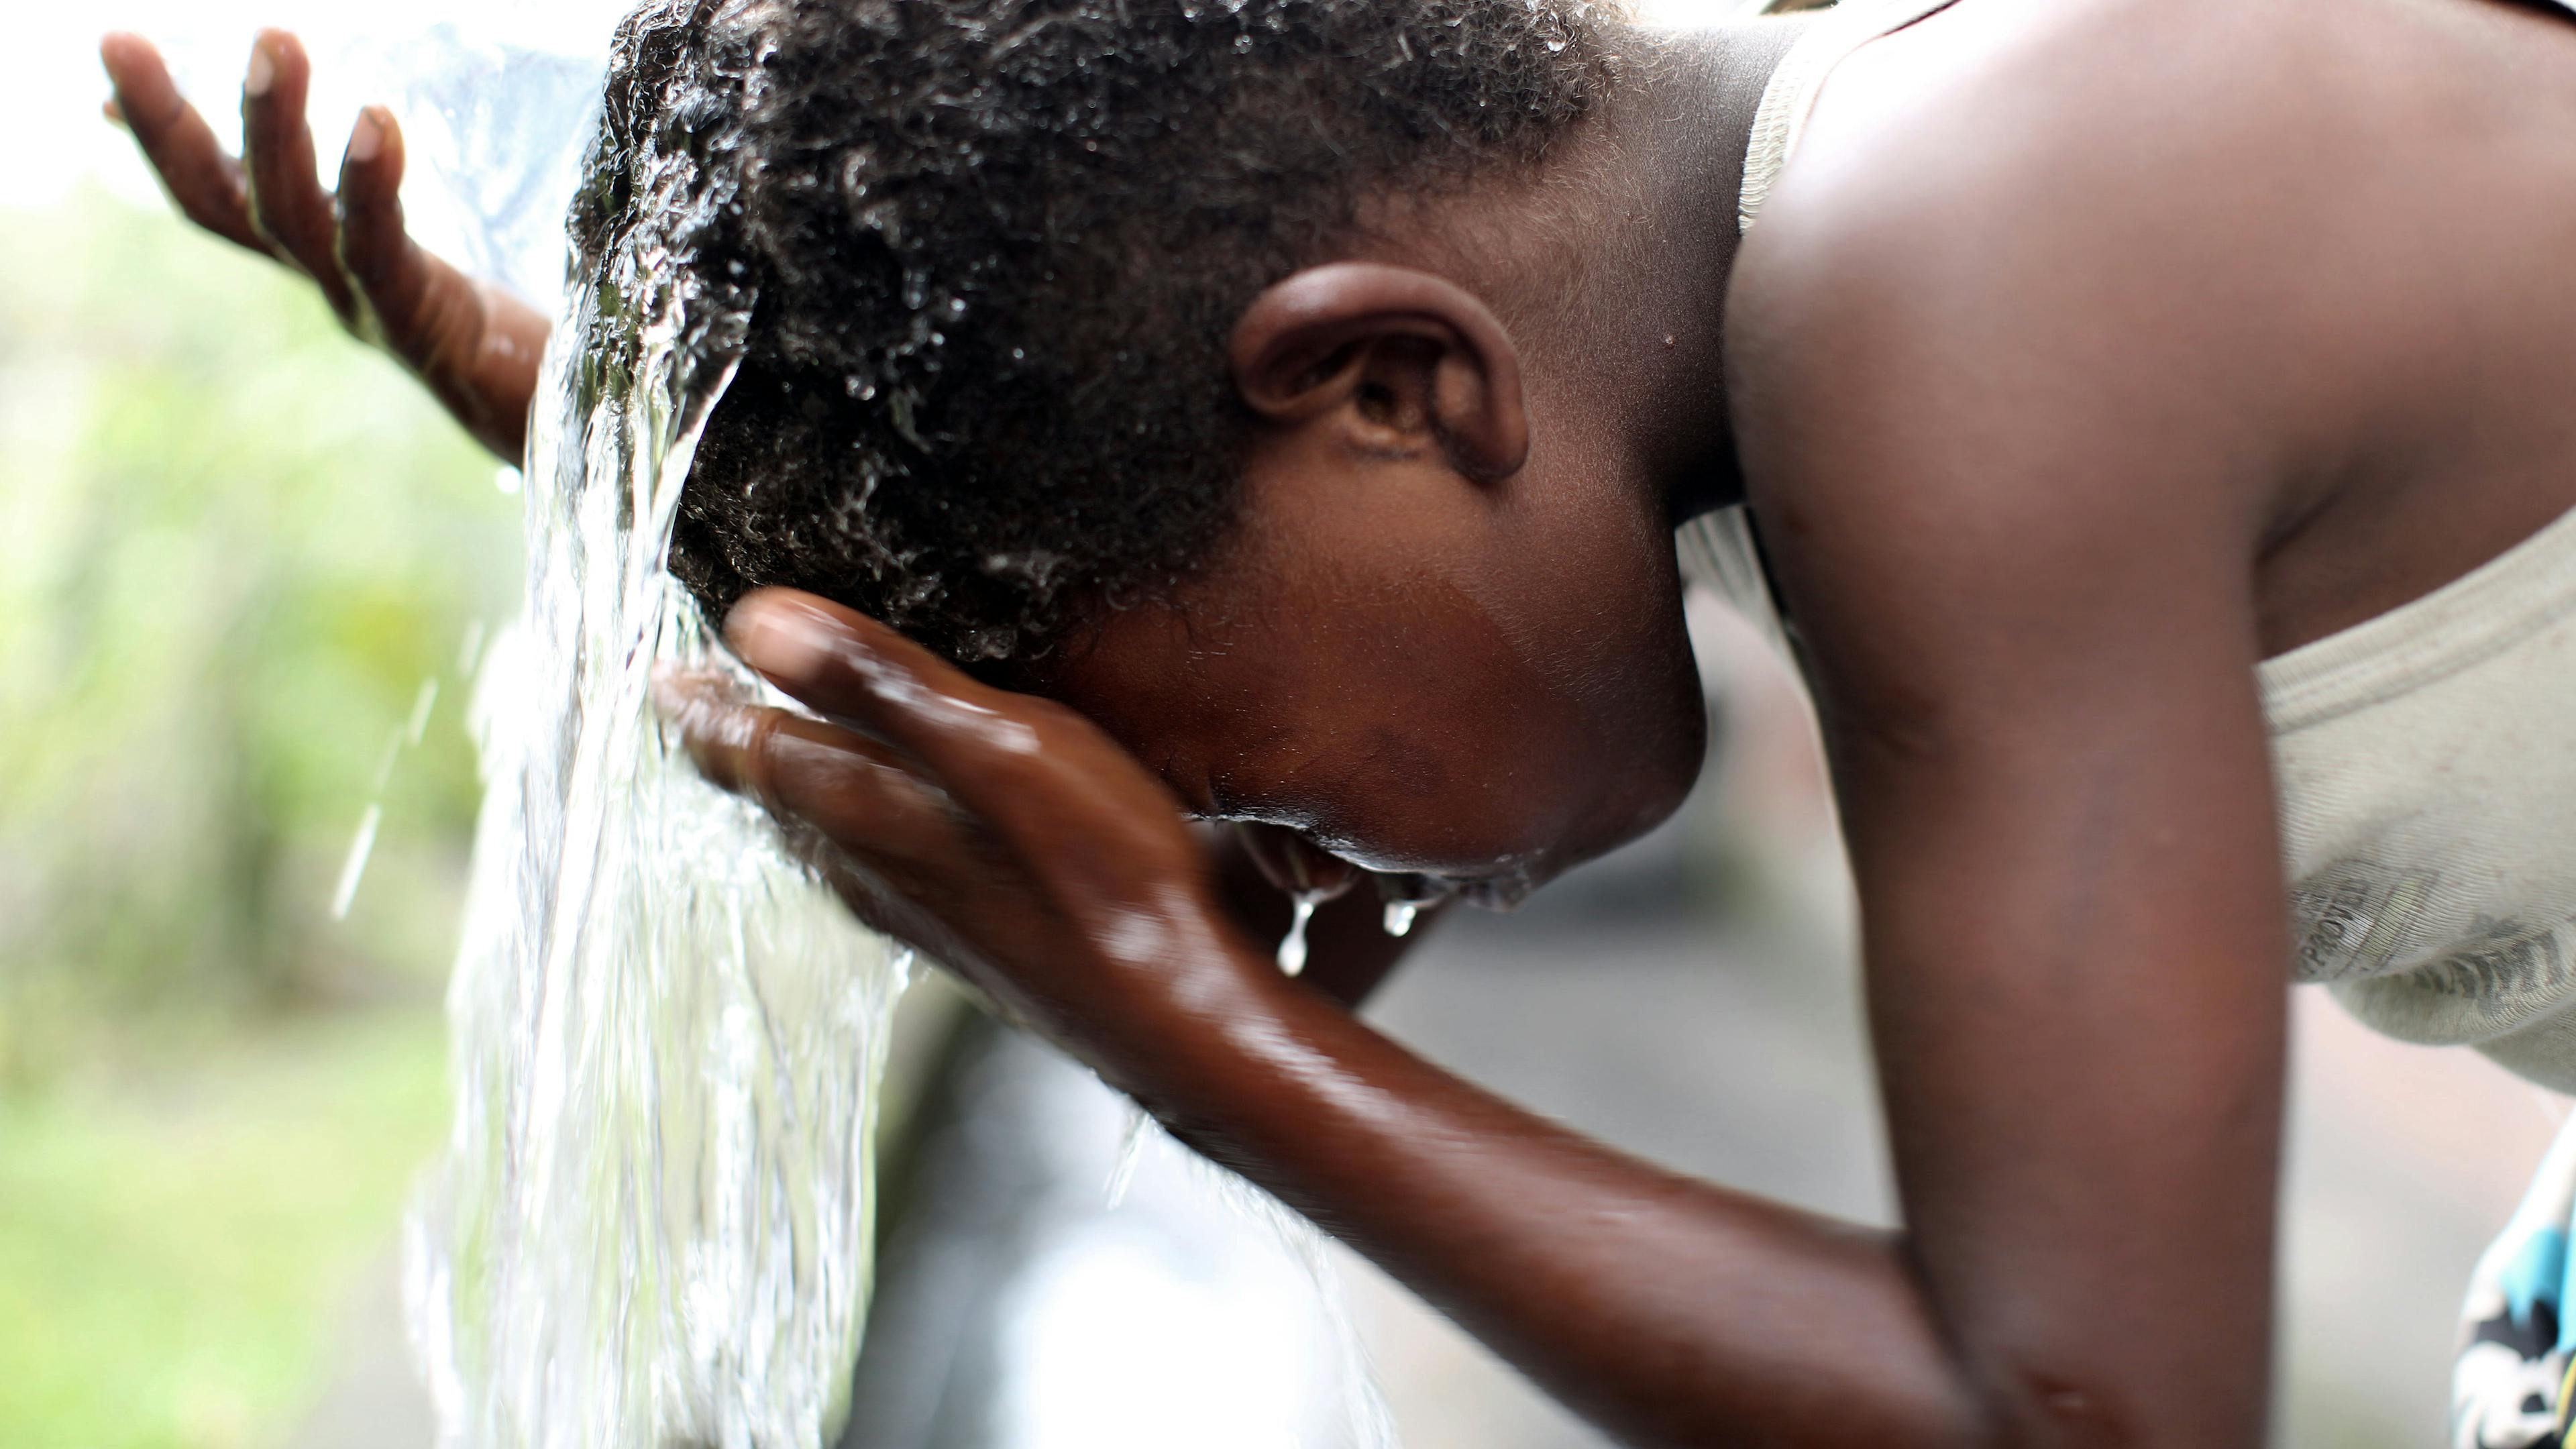 A young boy in the Pacific washes his face with clean water